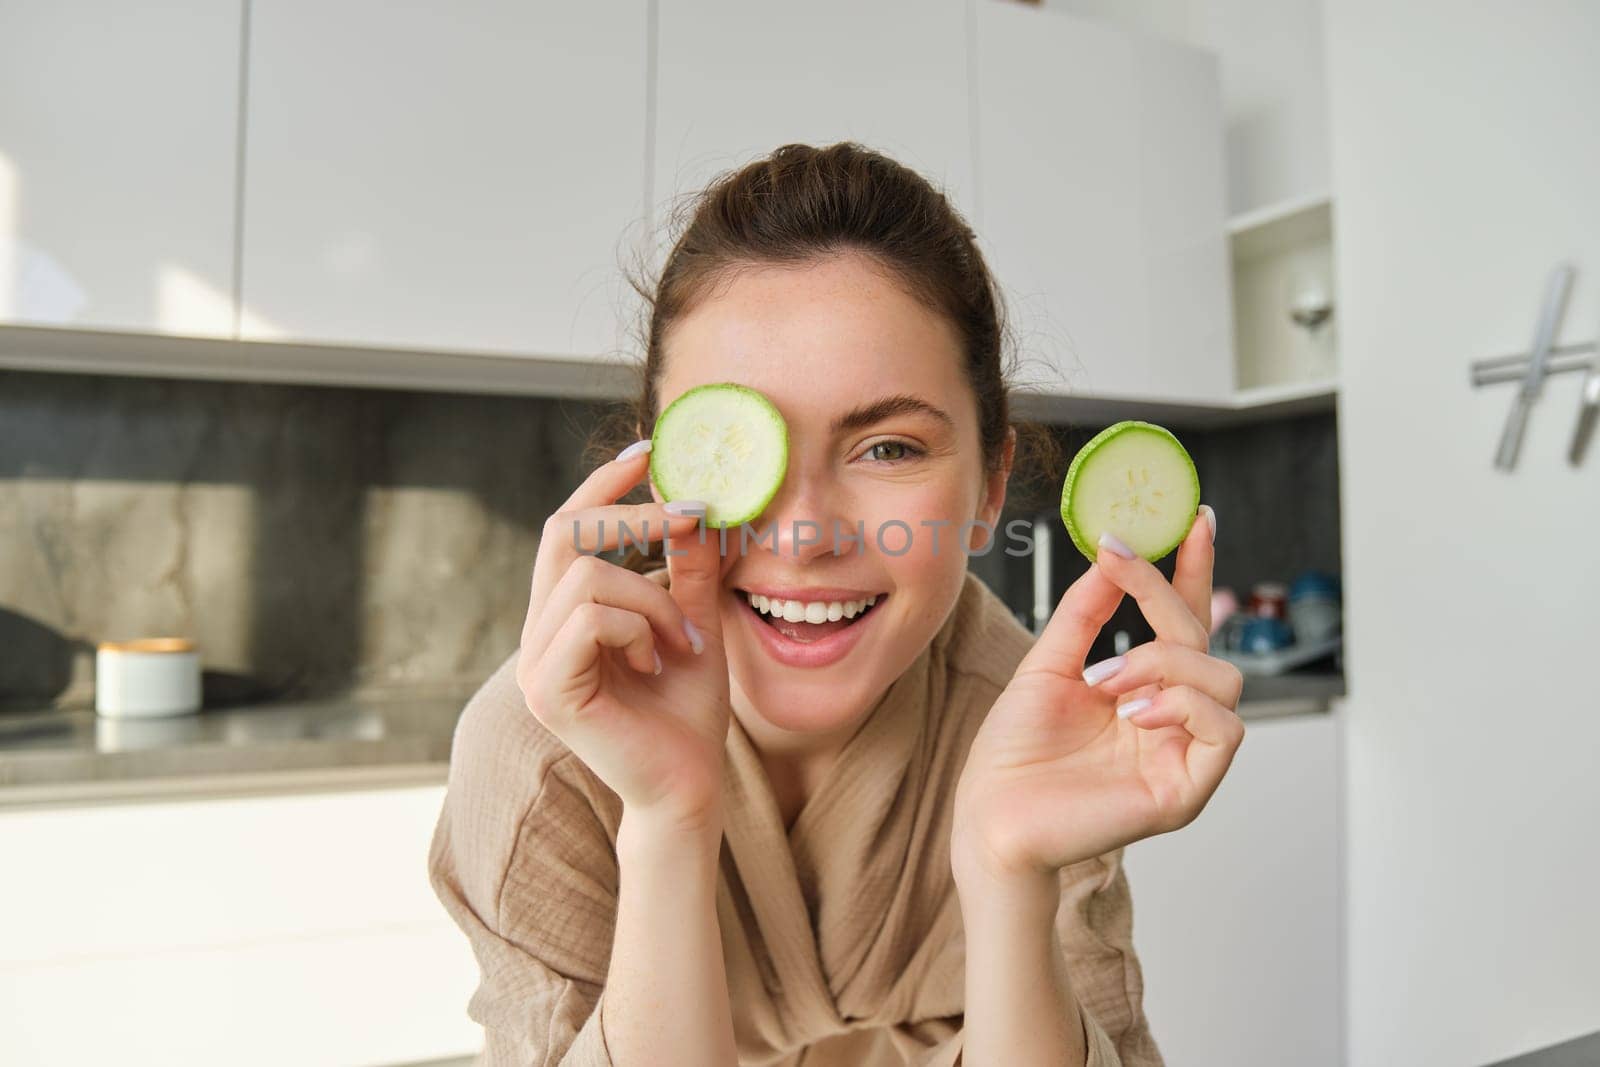 Funny, happy girl eating healthy, holding zucchini, chopping vegetables for healthy meal in the kitchen, posing in bathrobe.